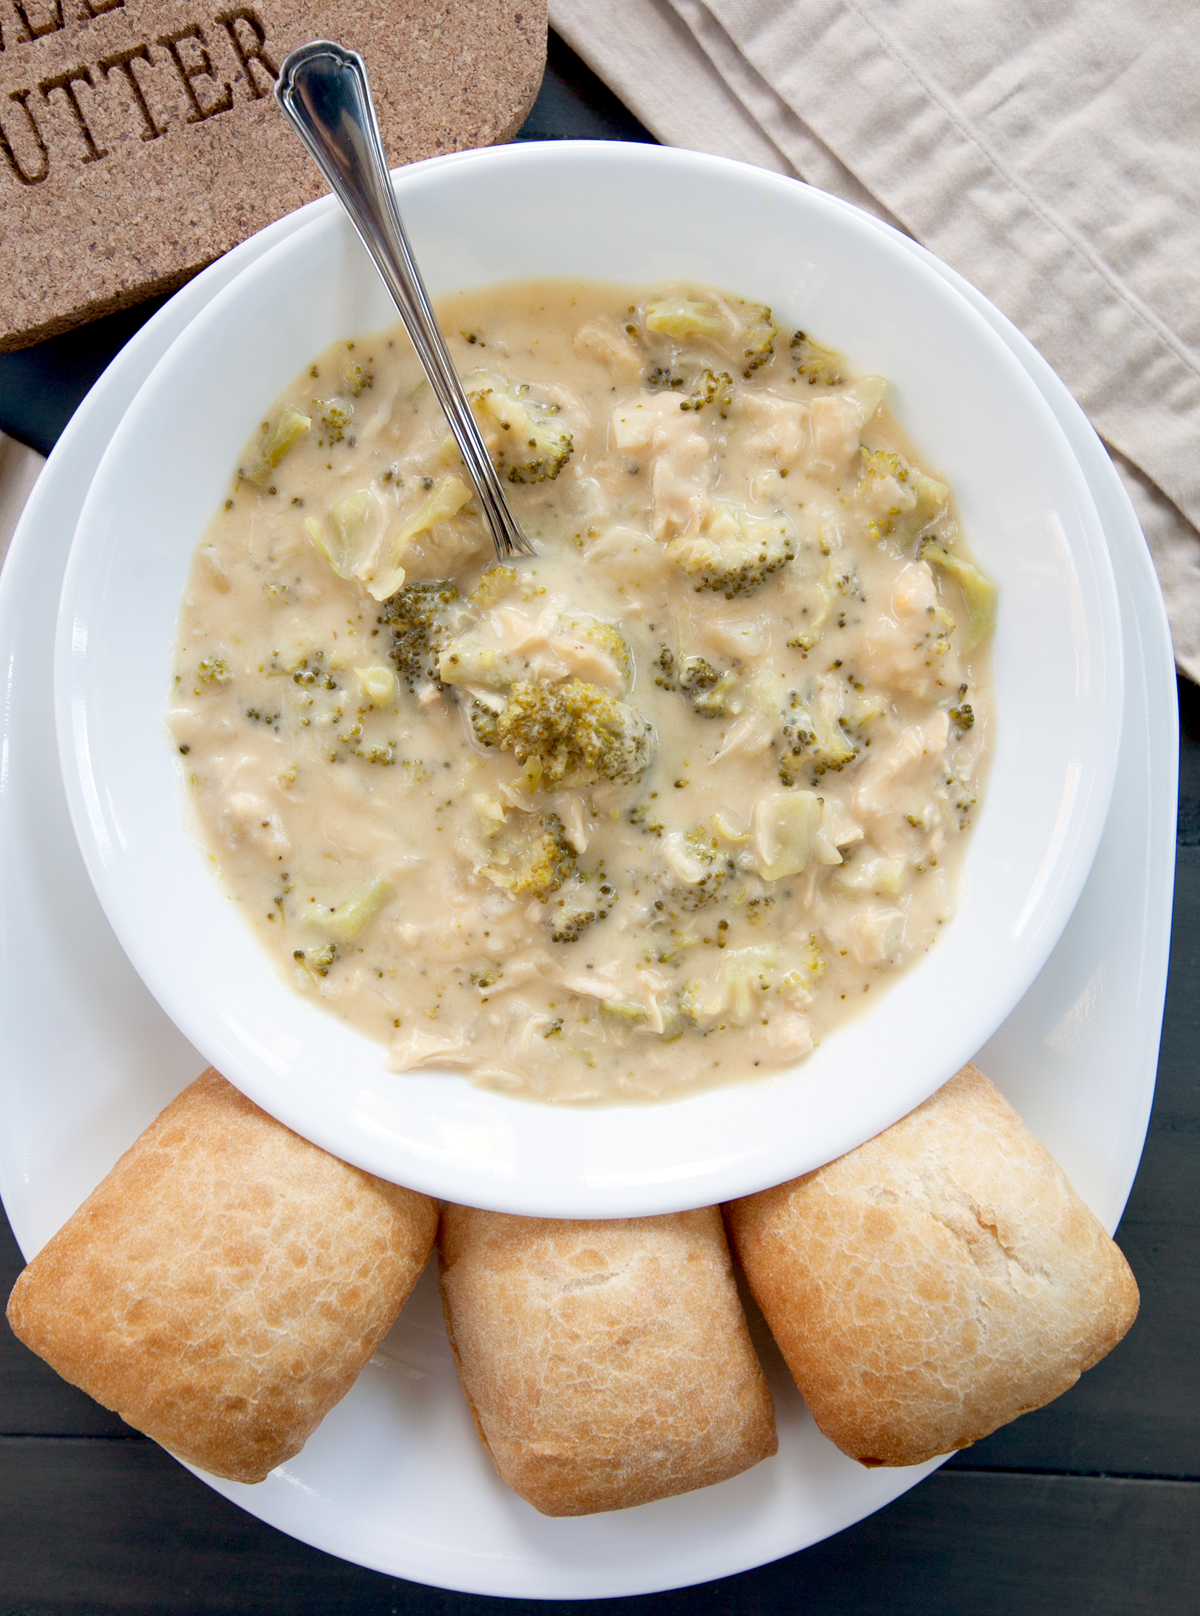 An overhead view of a bowl of chicken broccoli cheddar soup with crusty dinner rolls.